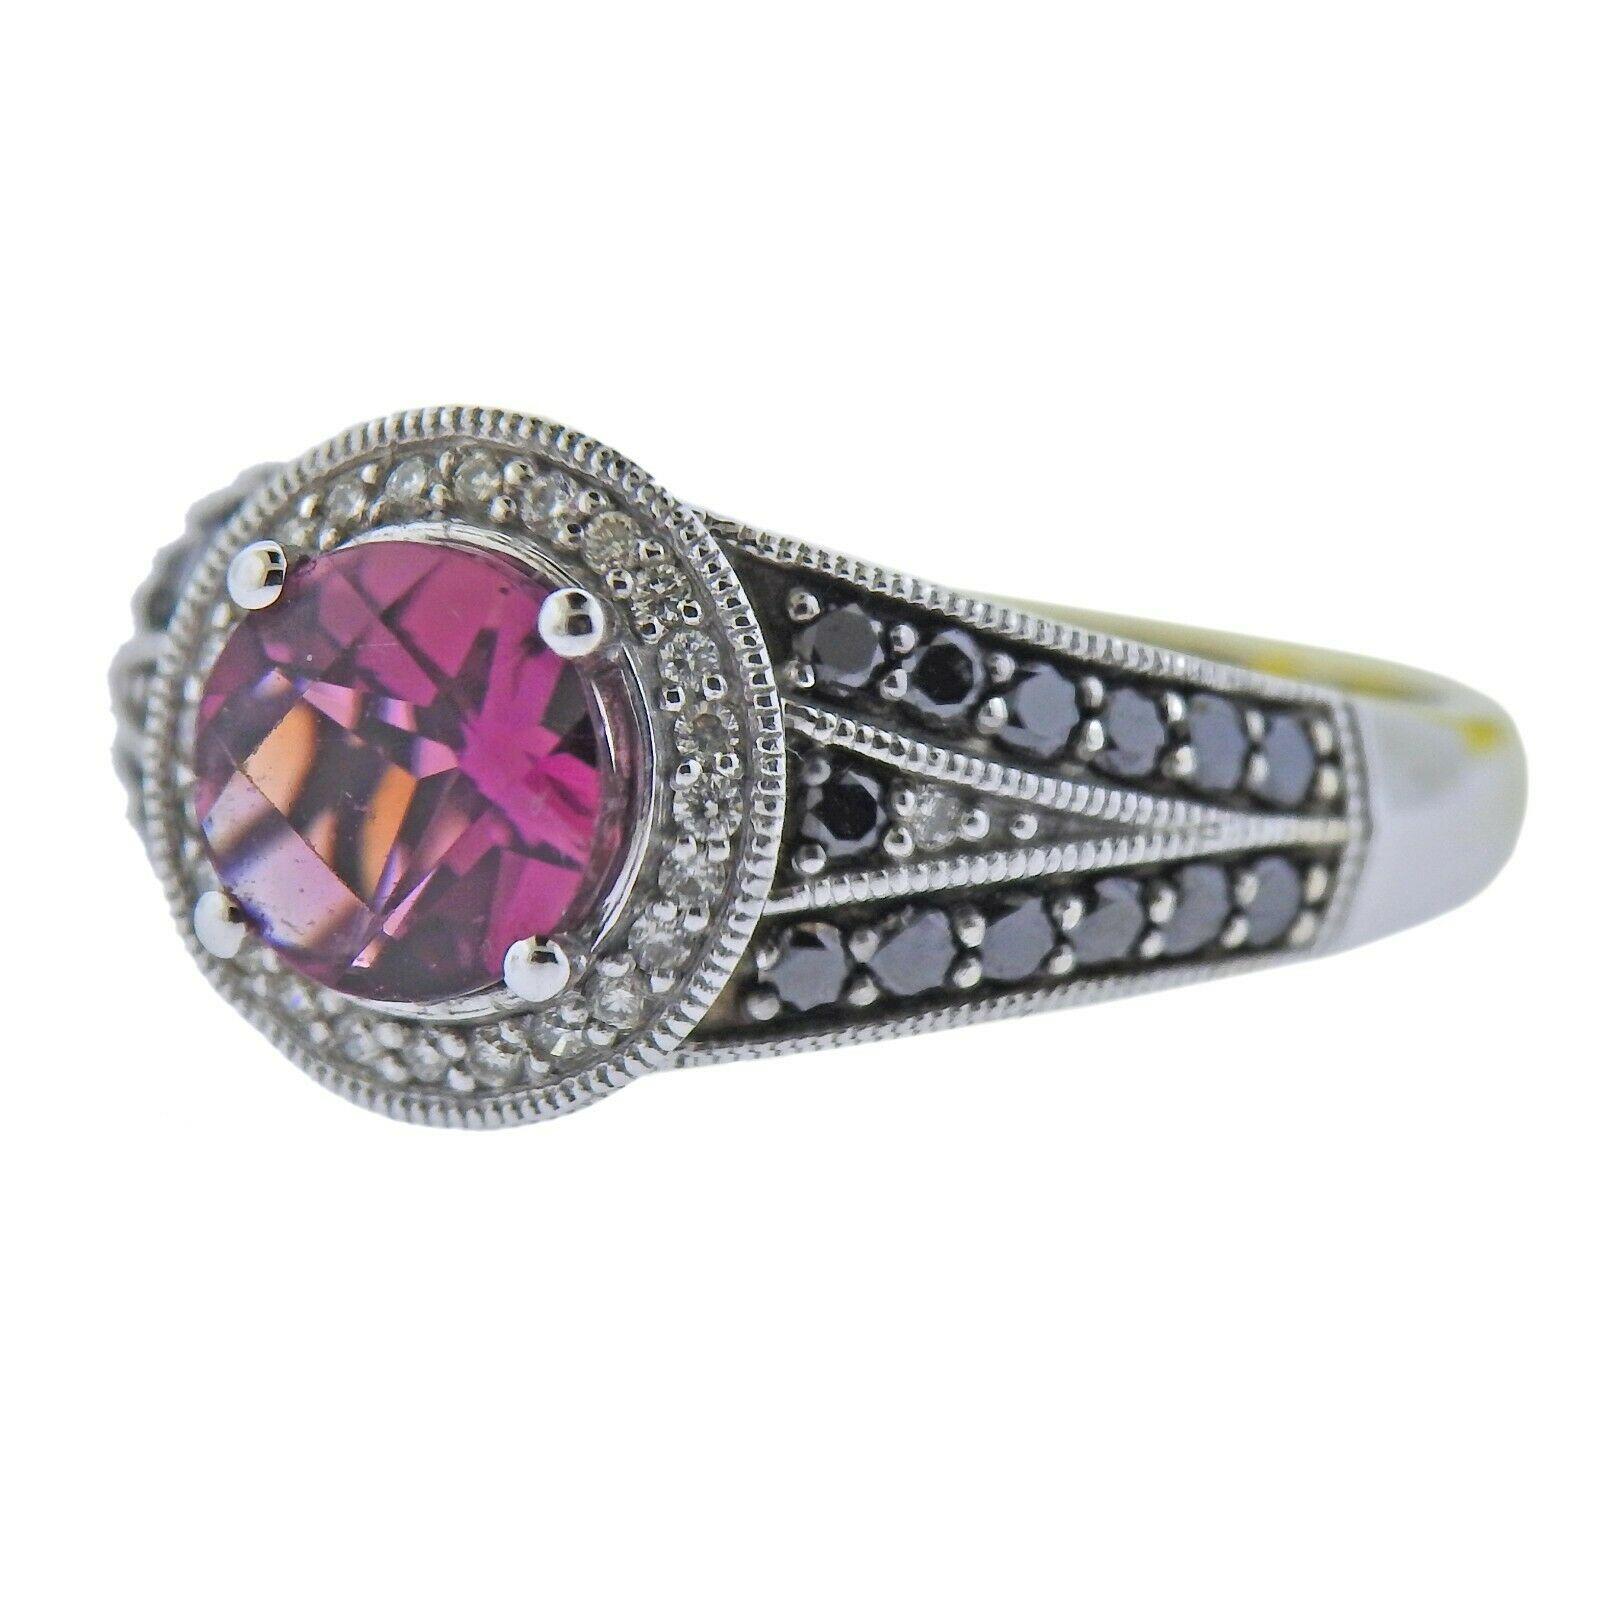 14k white gold ring by LeVian. Set with a total 0.49ctw of SI1/H and black diamonds, and a 1.20ct pink tourmaline. Ring size - 6.75, ring top - 11mm wide. Marked - Arusha by Le Vian, 14kt. Weight- 4.9 grams.
